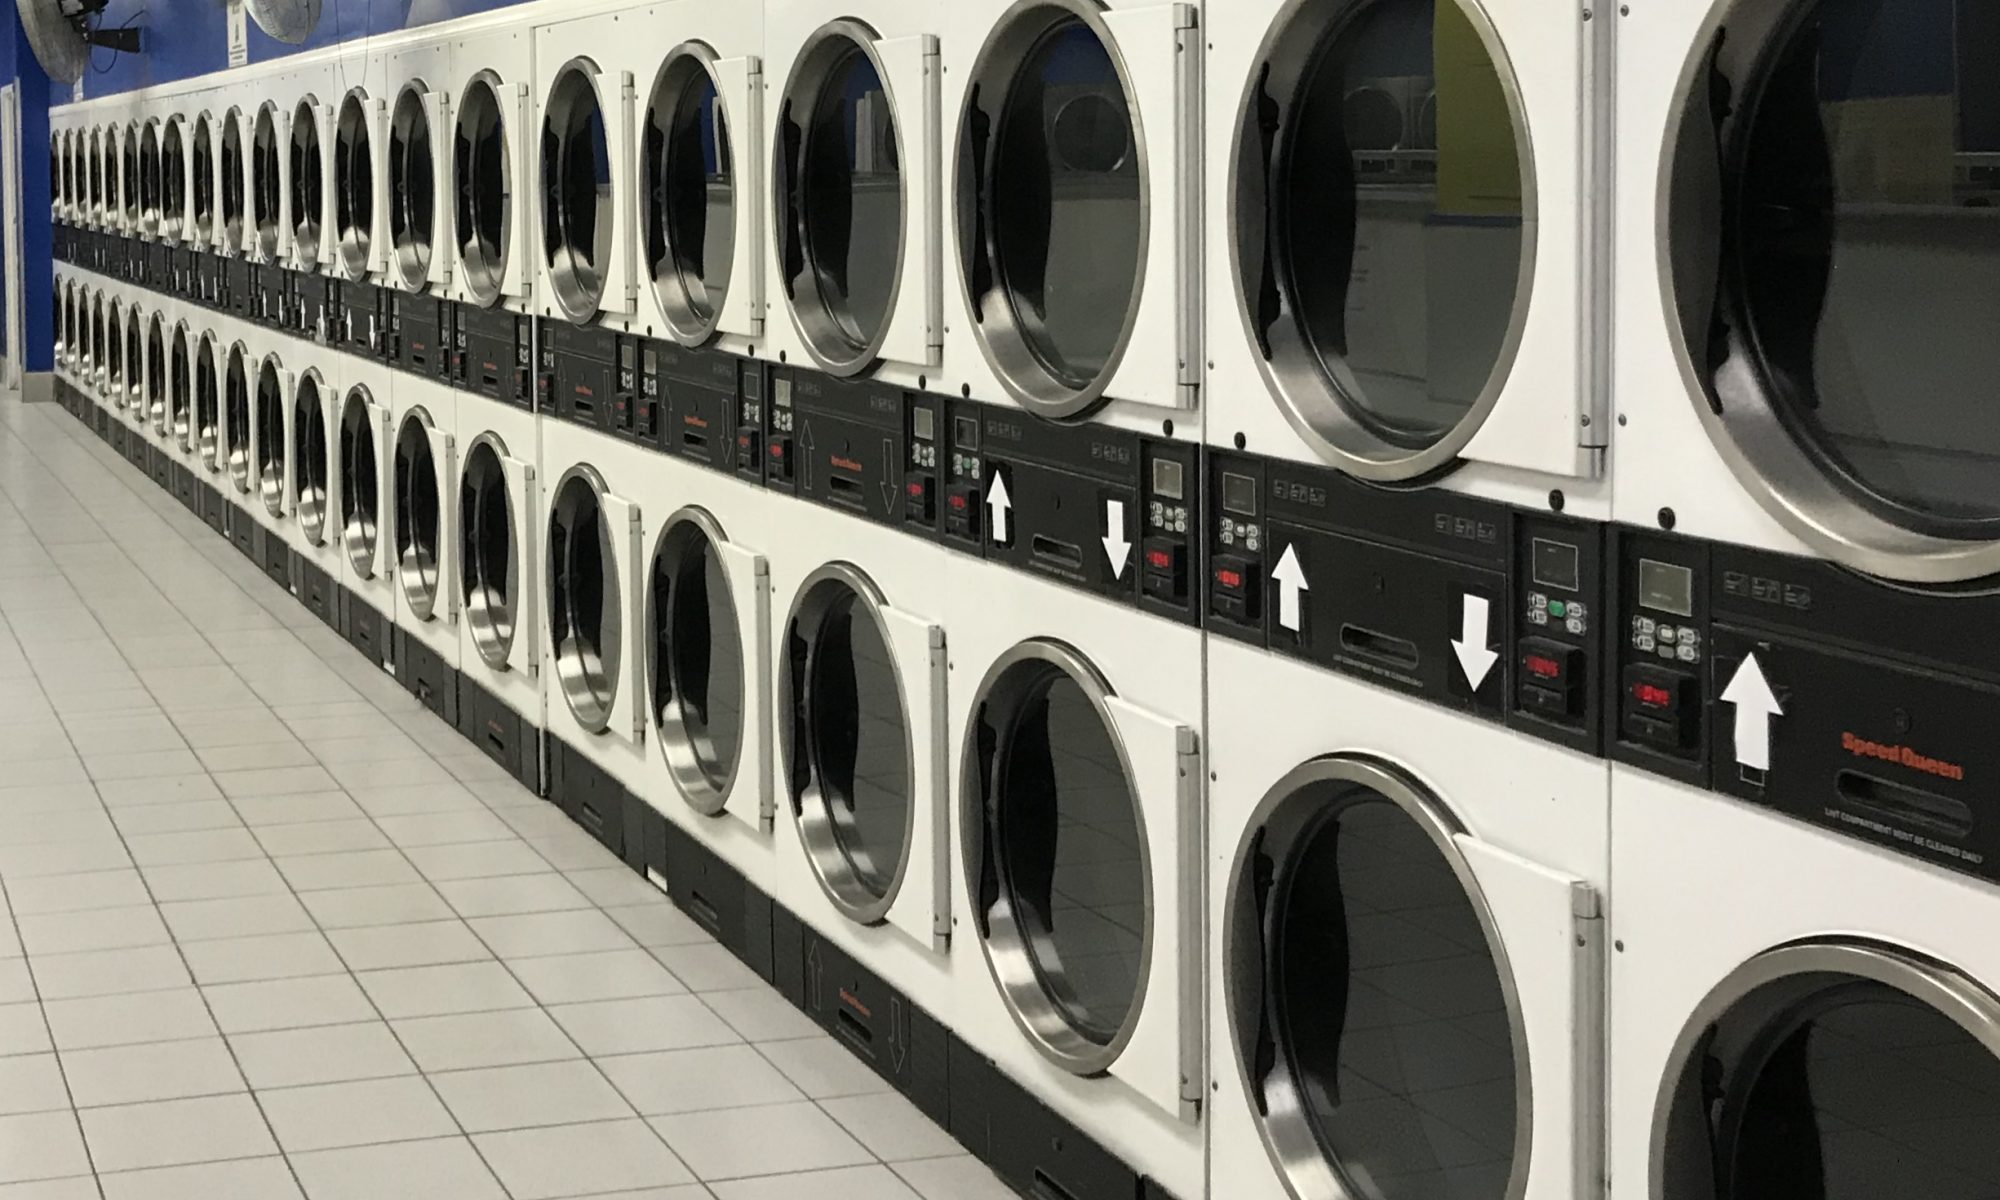 60 dryers - never wait to get your laundry done!